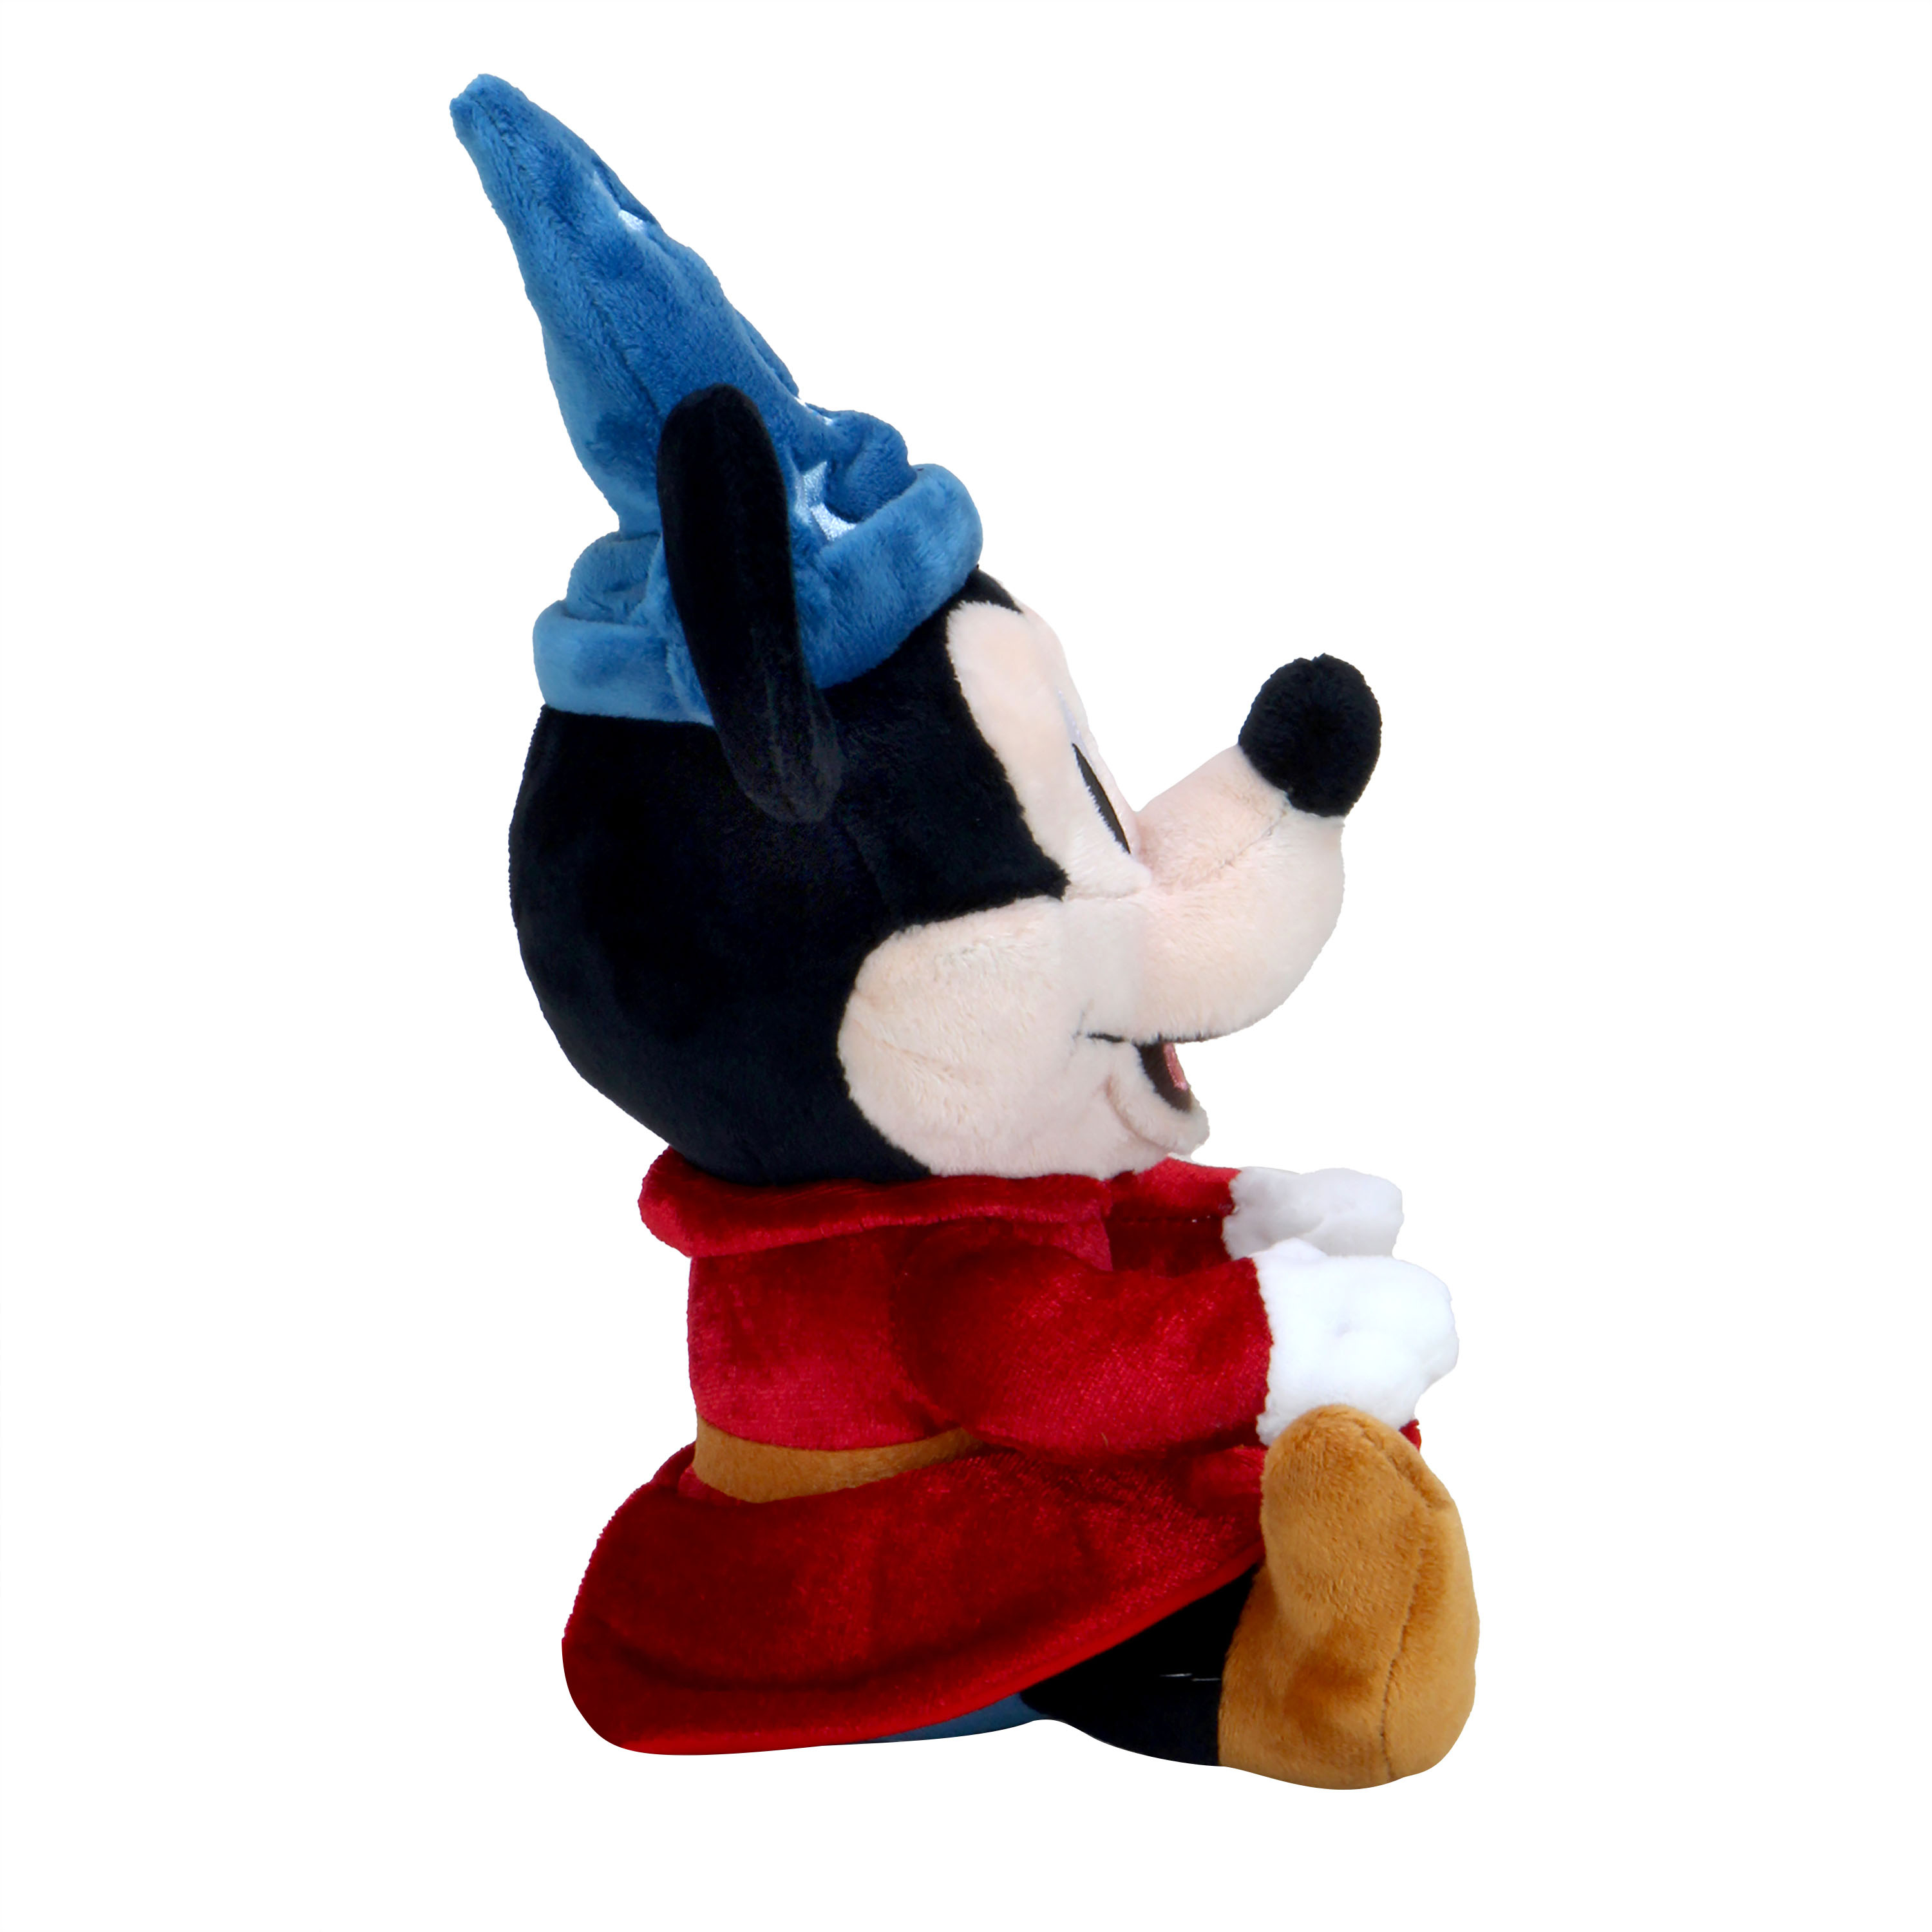 Disney Store Official Fantasia Collection: Medium 22-inch Sorcerer Mickey Mouse Plush - Authentic, Soft & Cuddly Toy - Ideal for Fans & Kids